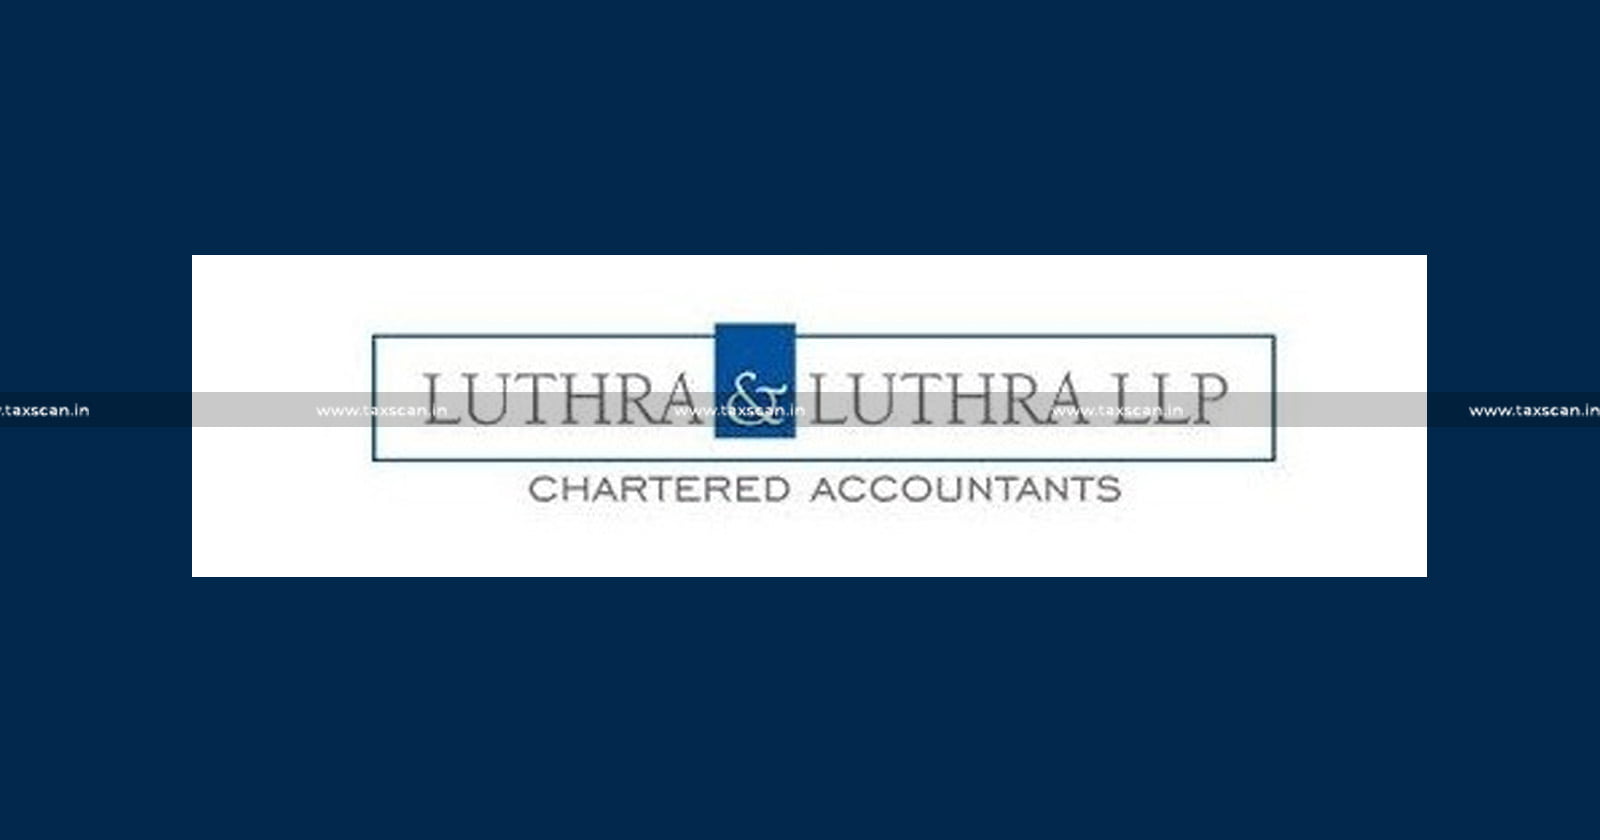 Bonus - Paid - to - Partners - attracts - Income - Tax - Act - ITAT - allows - Income - Tax - Addition - to - Luthra - and - Luthra - LLP - TAXSCAN